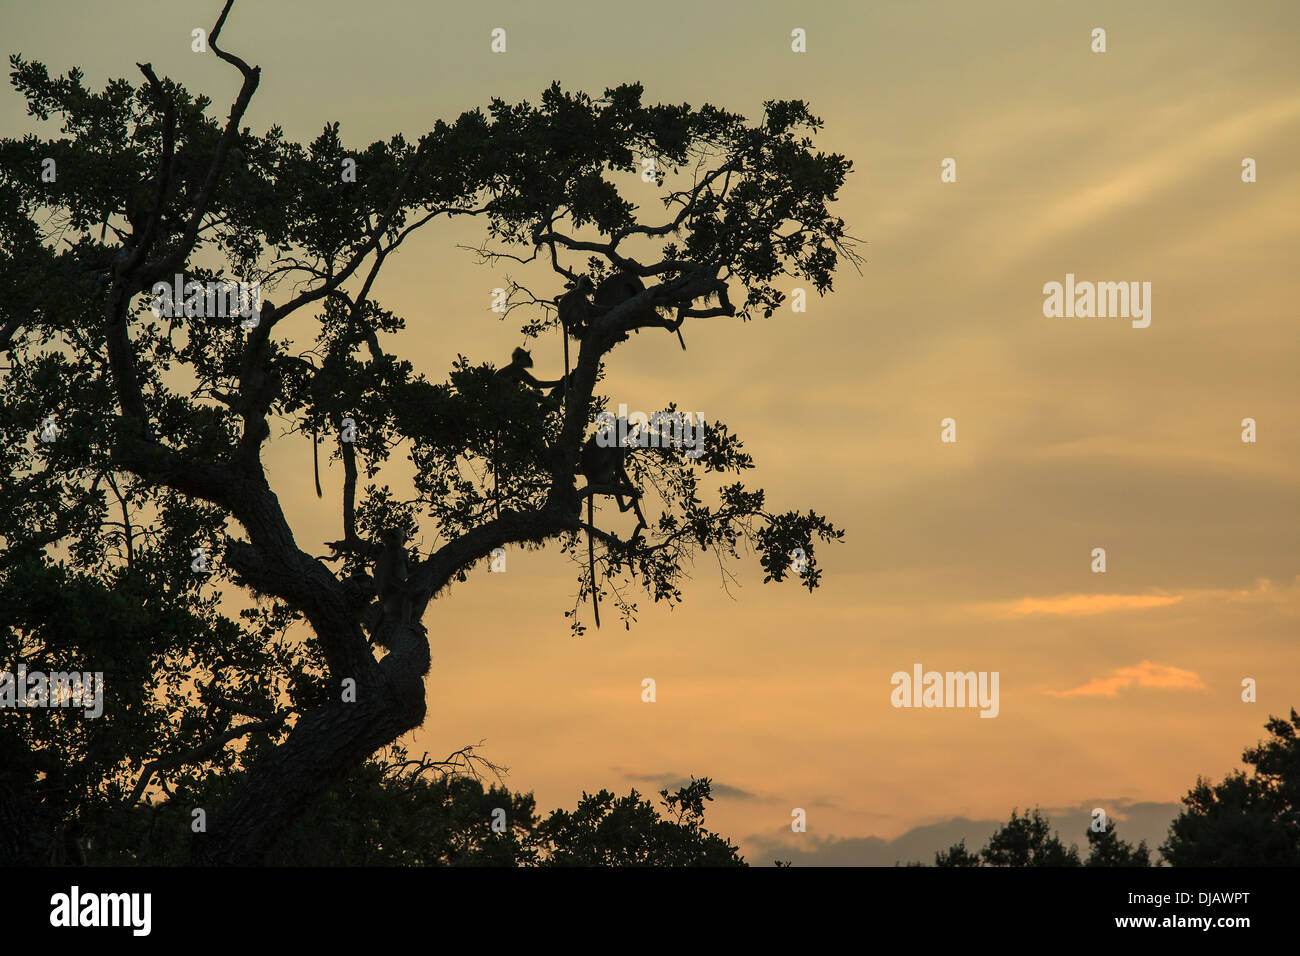 Monkeys sitting in a tree at sunset Stock Photo